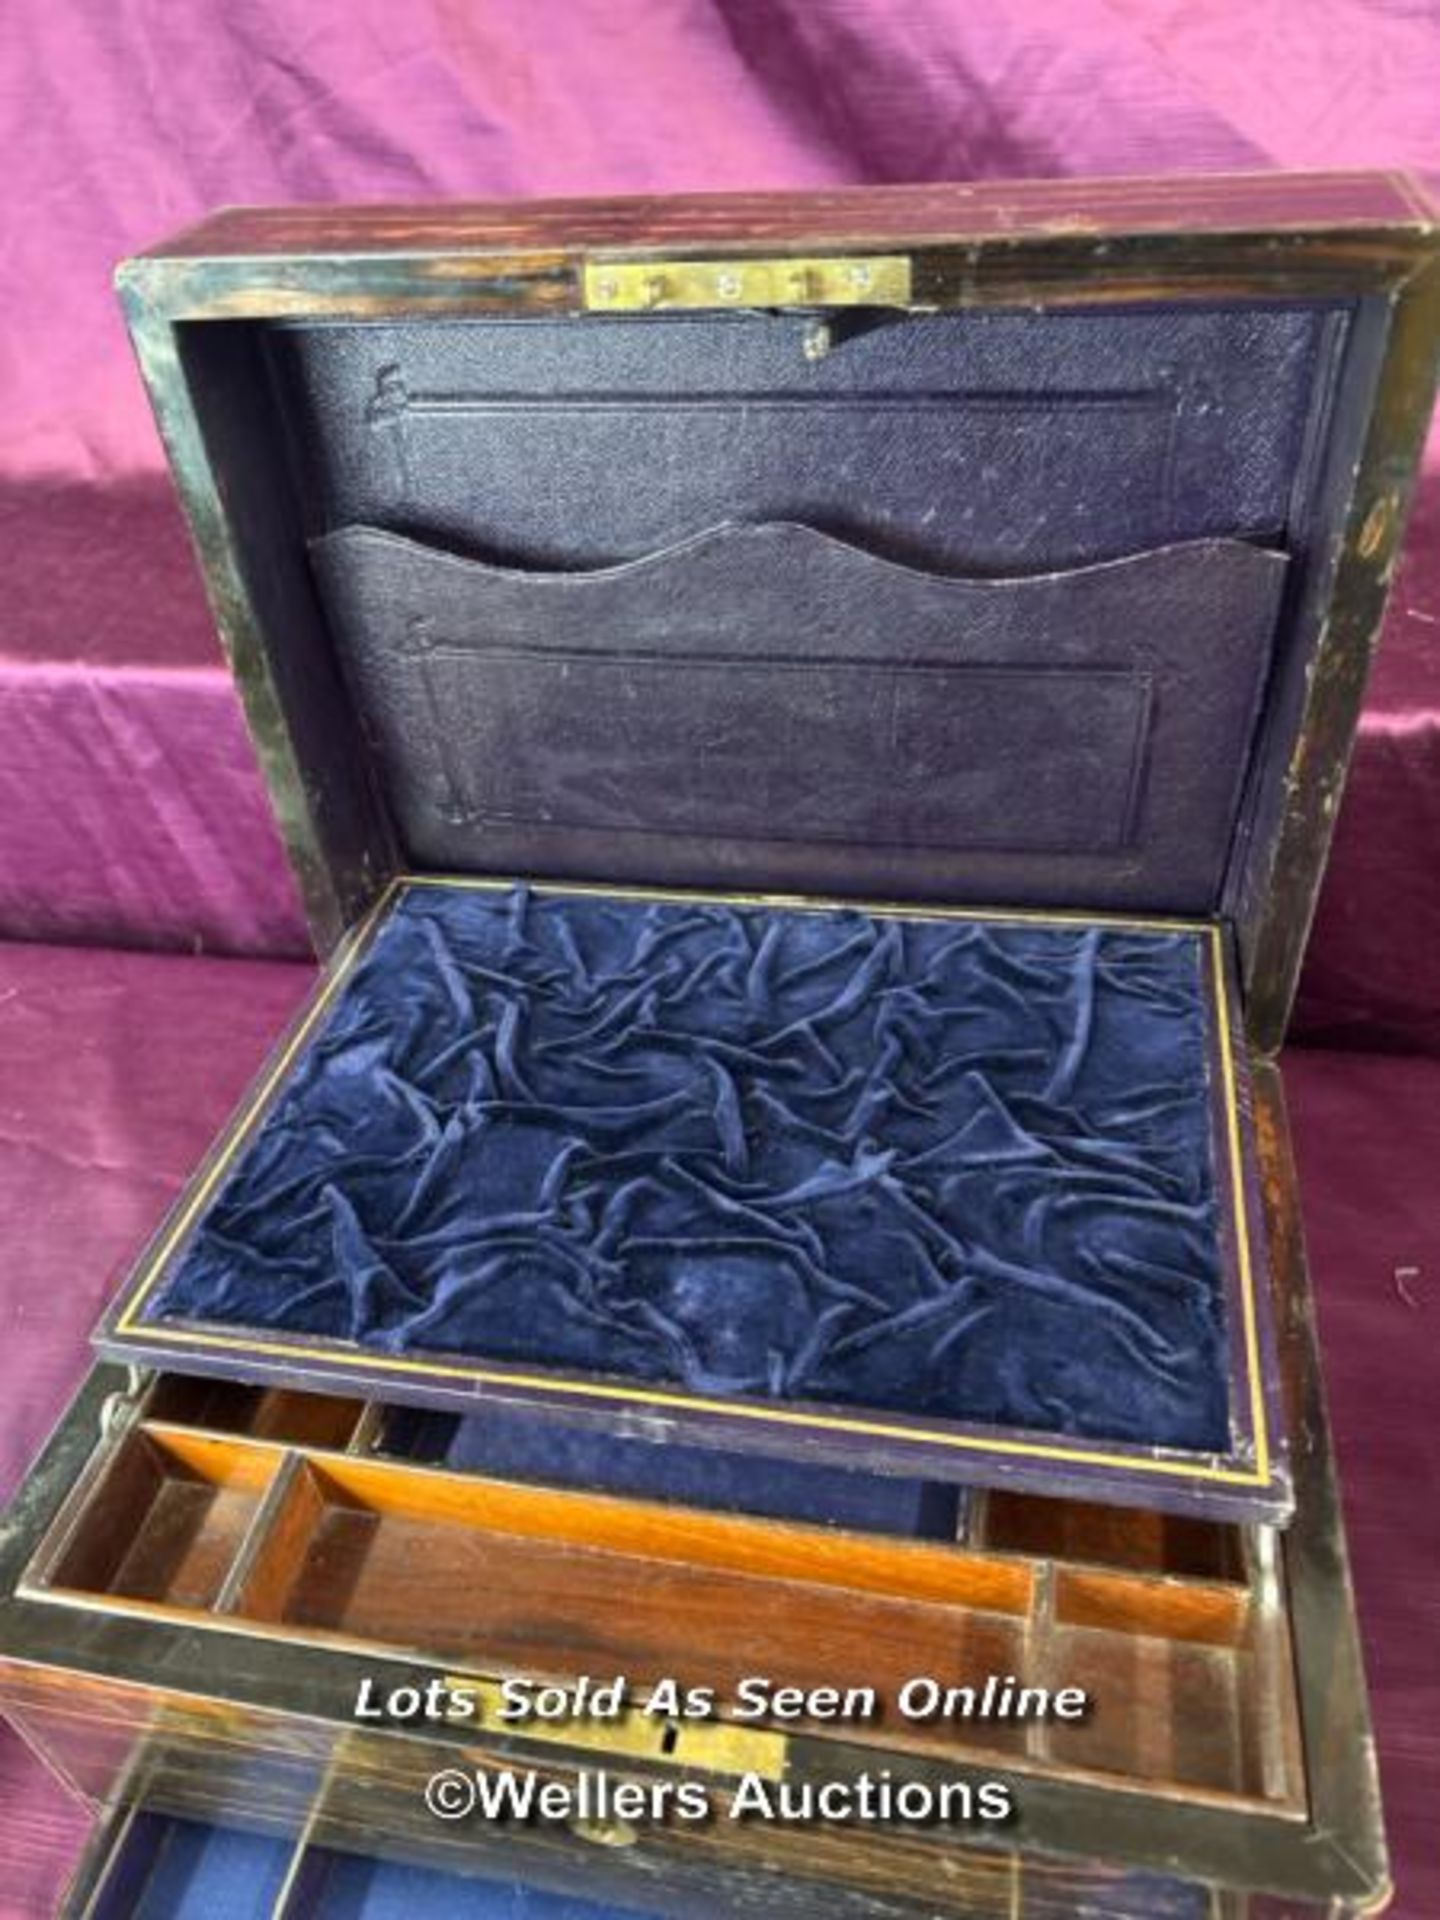 EARLY 19TH CENTURY GENTLEMAN'S VANITY BOX CONTAINING STERLING SILVER AND GLASS CONTAINERS WITH - Image 6 of 14